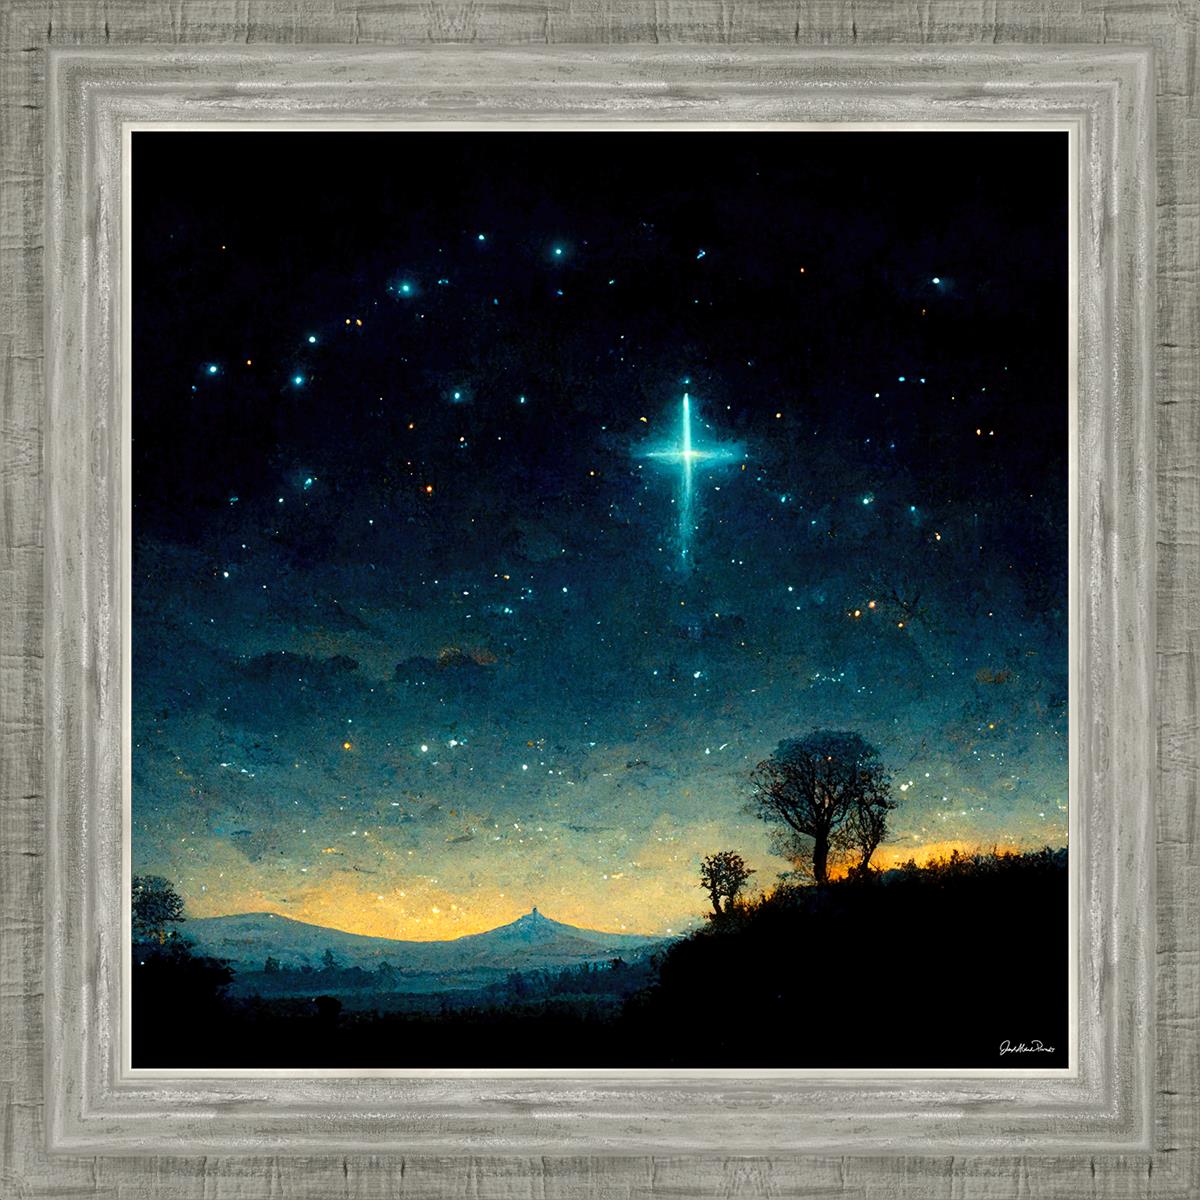 Star In The East by Joseph Alexander Paradis Bethlehem at night with a  bright star shining – Havenlight.com